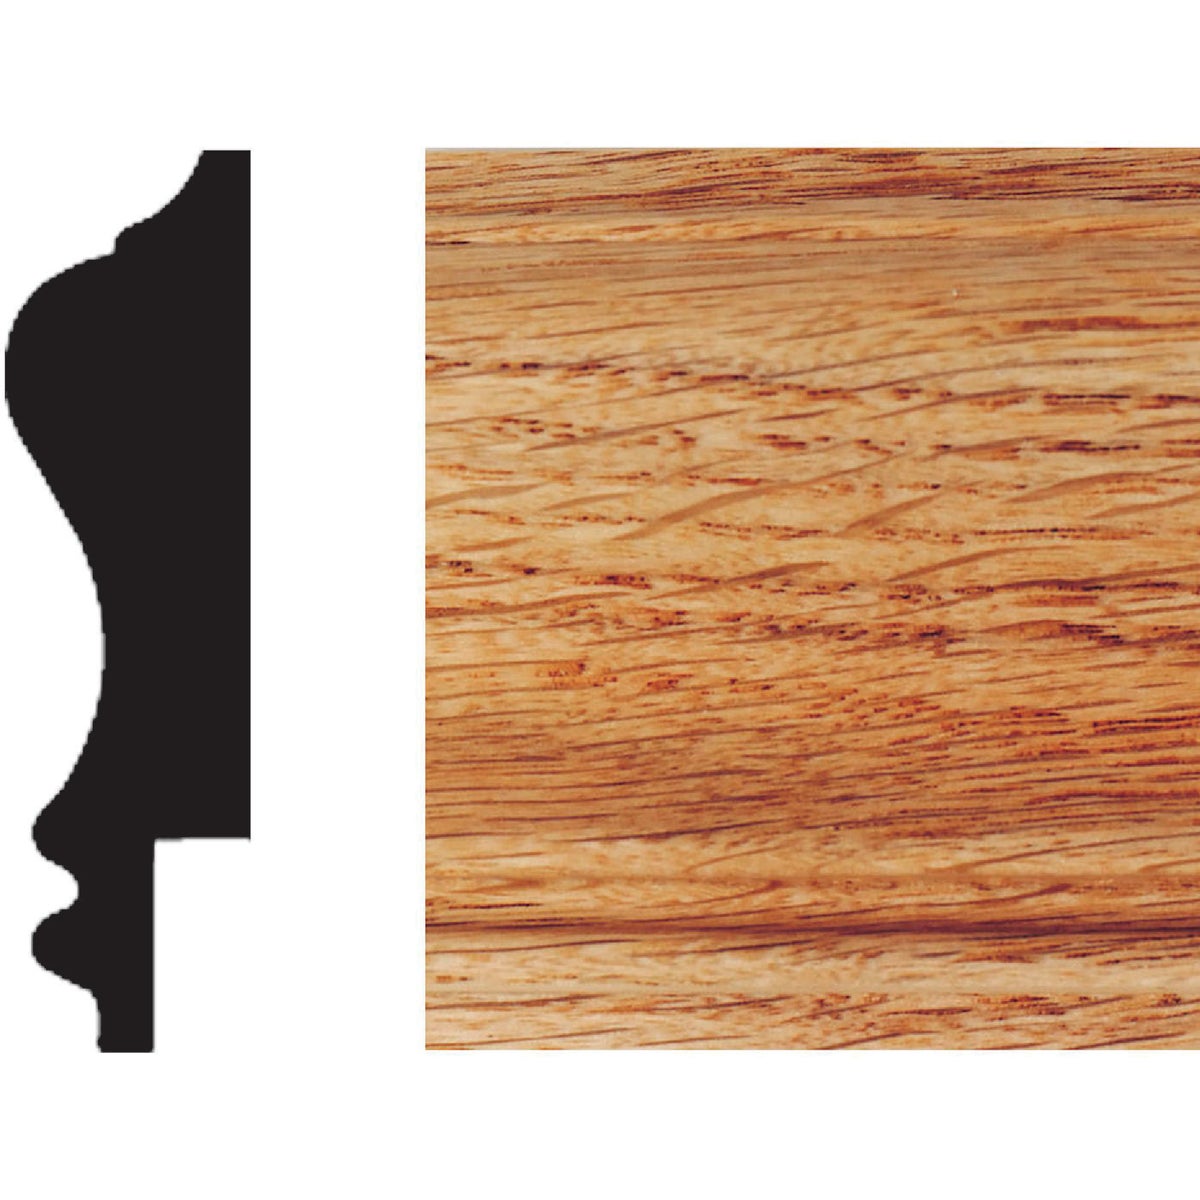 Item 181544, Red oak sanded smooth and ready-to-finish with stain or paint.